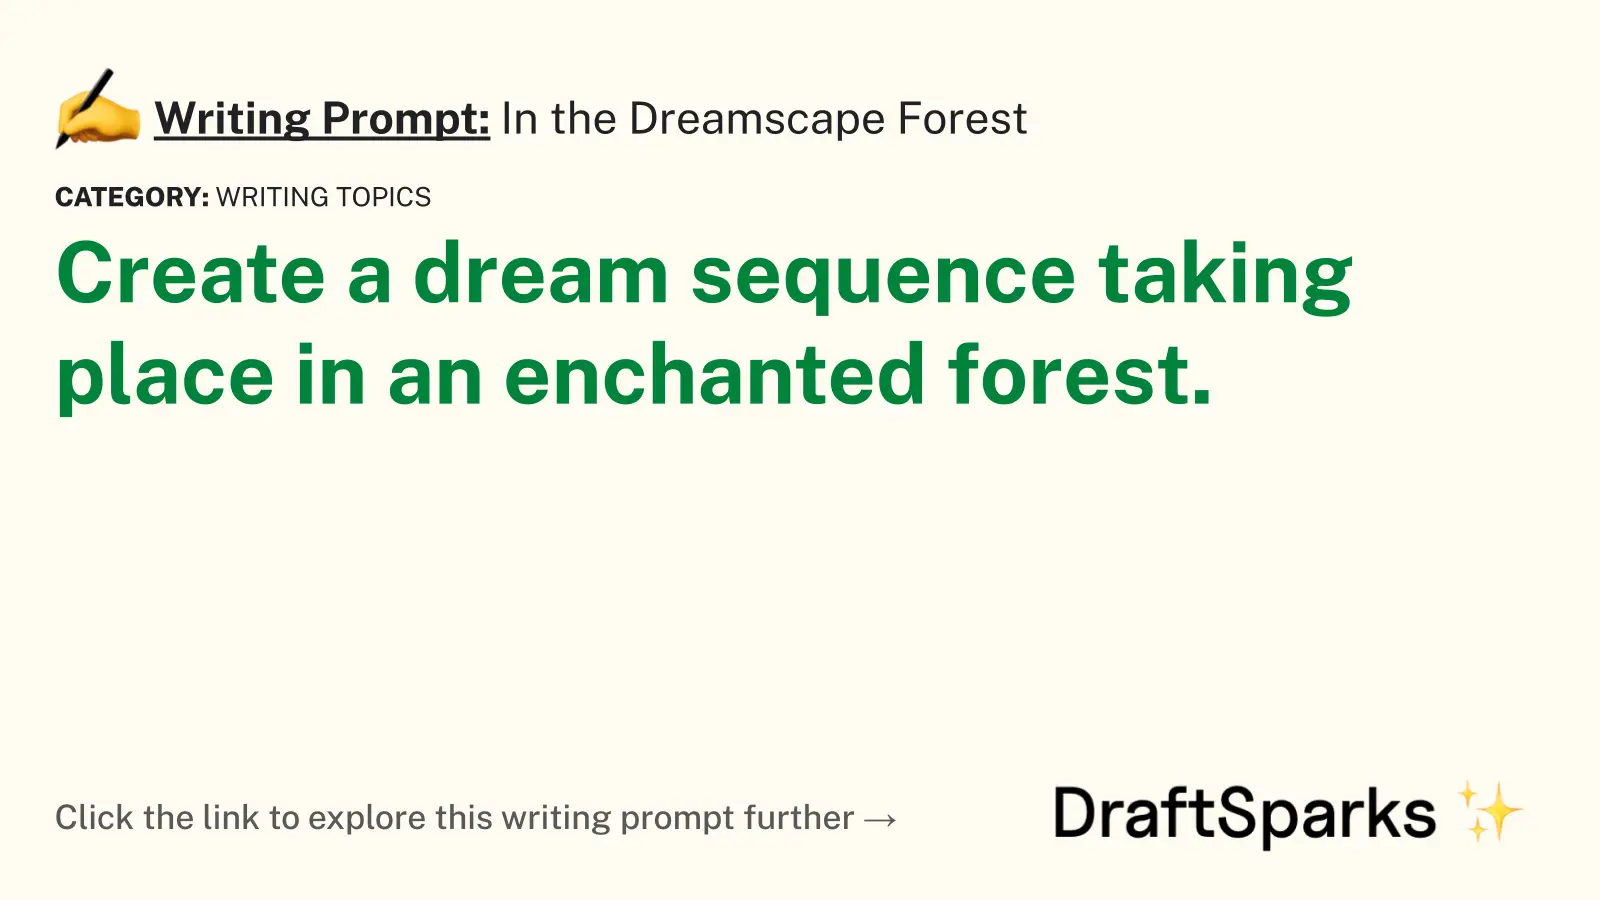 In the Dreamscape Forest